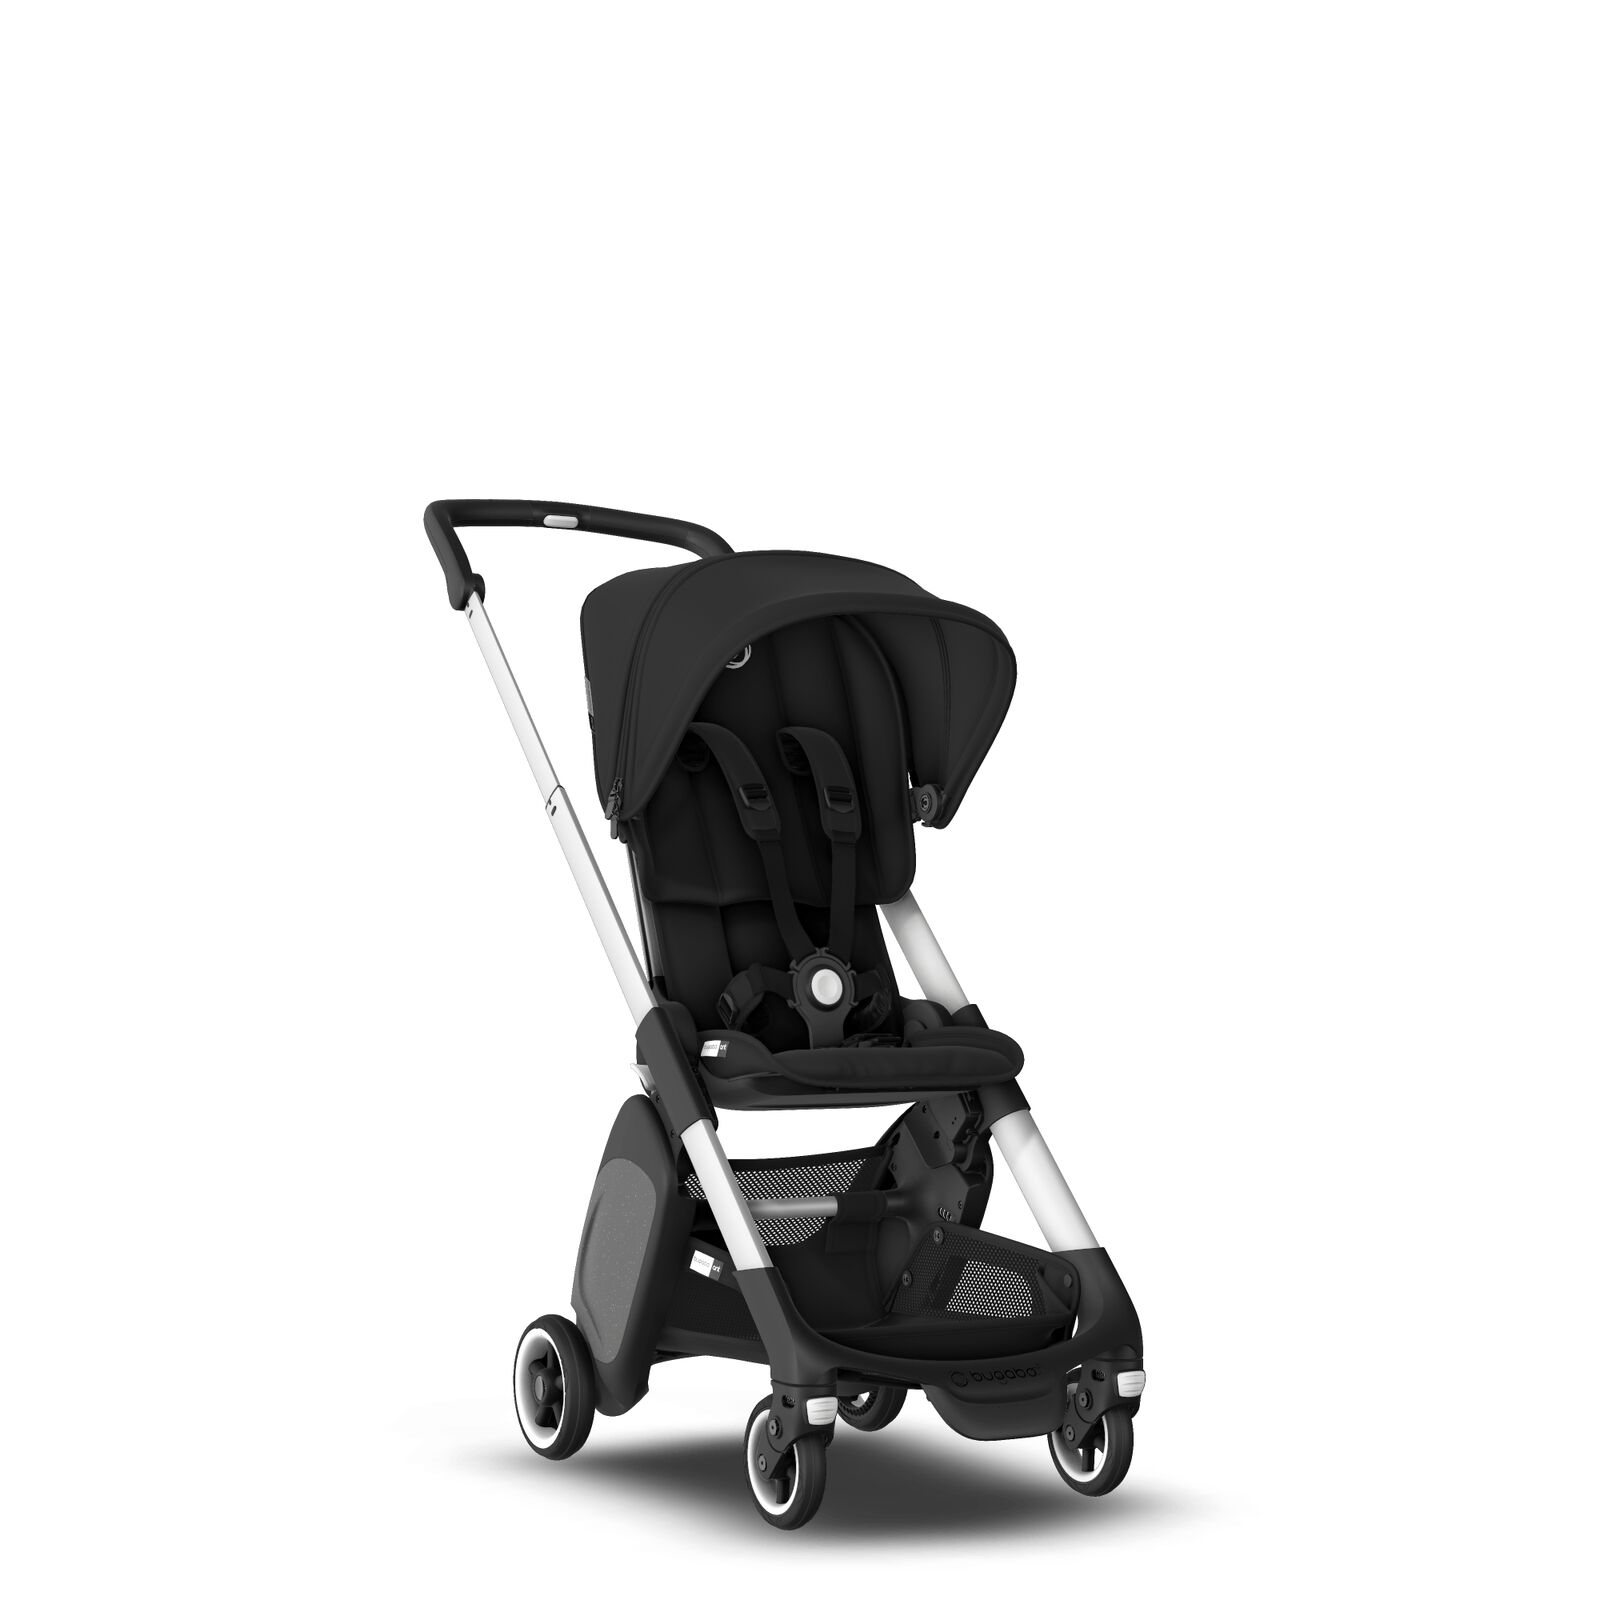 Bugaboo Ant ultra compact stroller - View 1